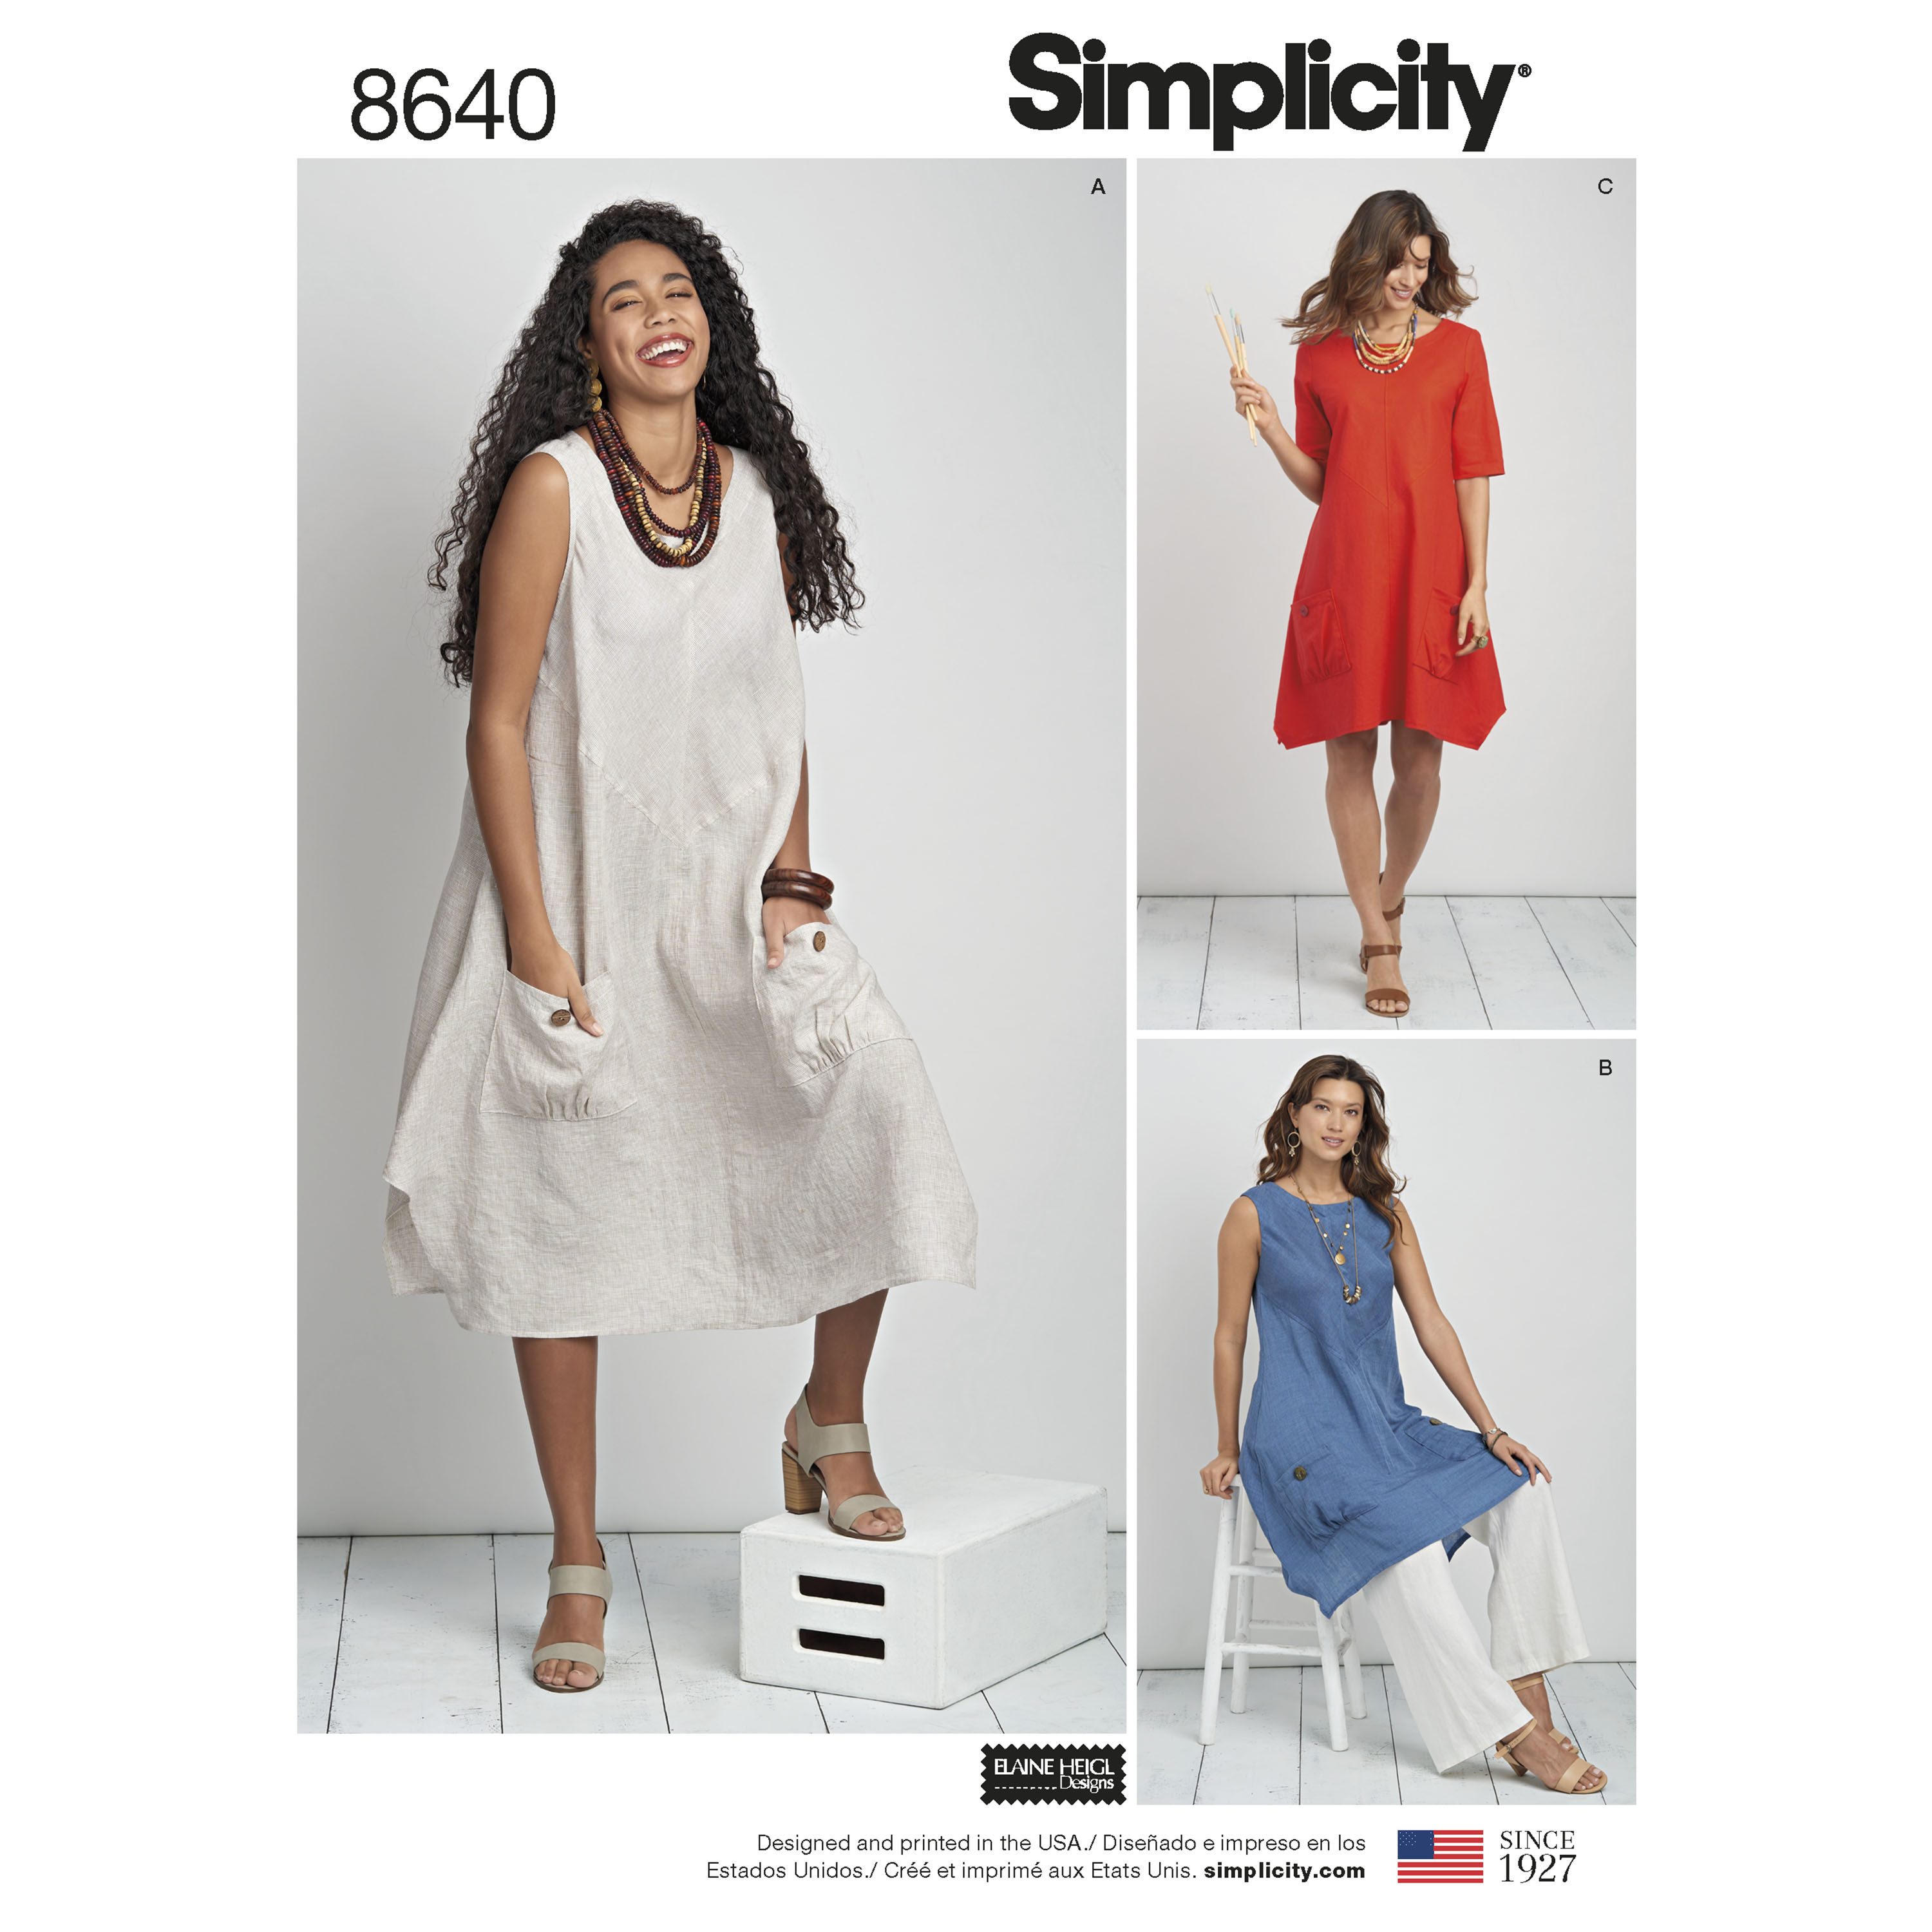 https://images.patternreview.com/sewing/patterns/simplicity/2018/8640/8640.jpg